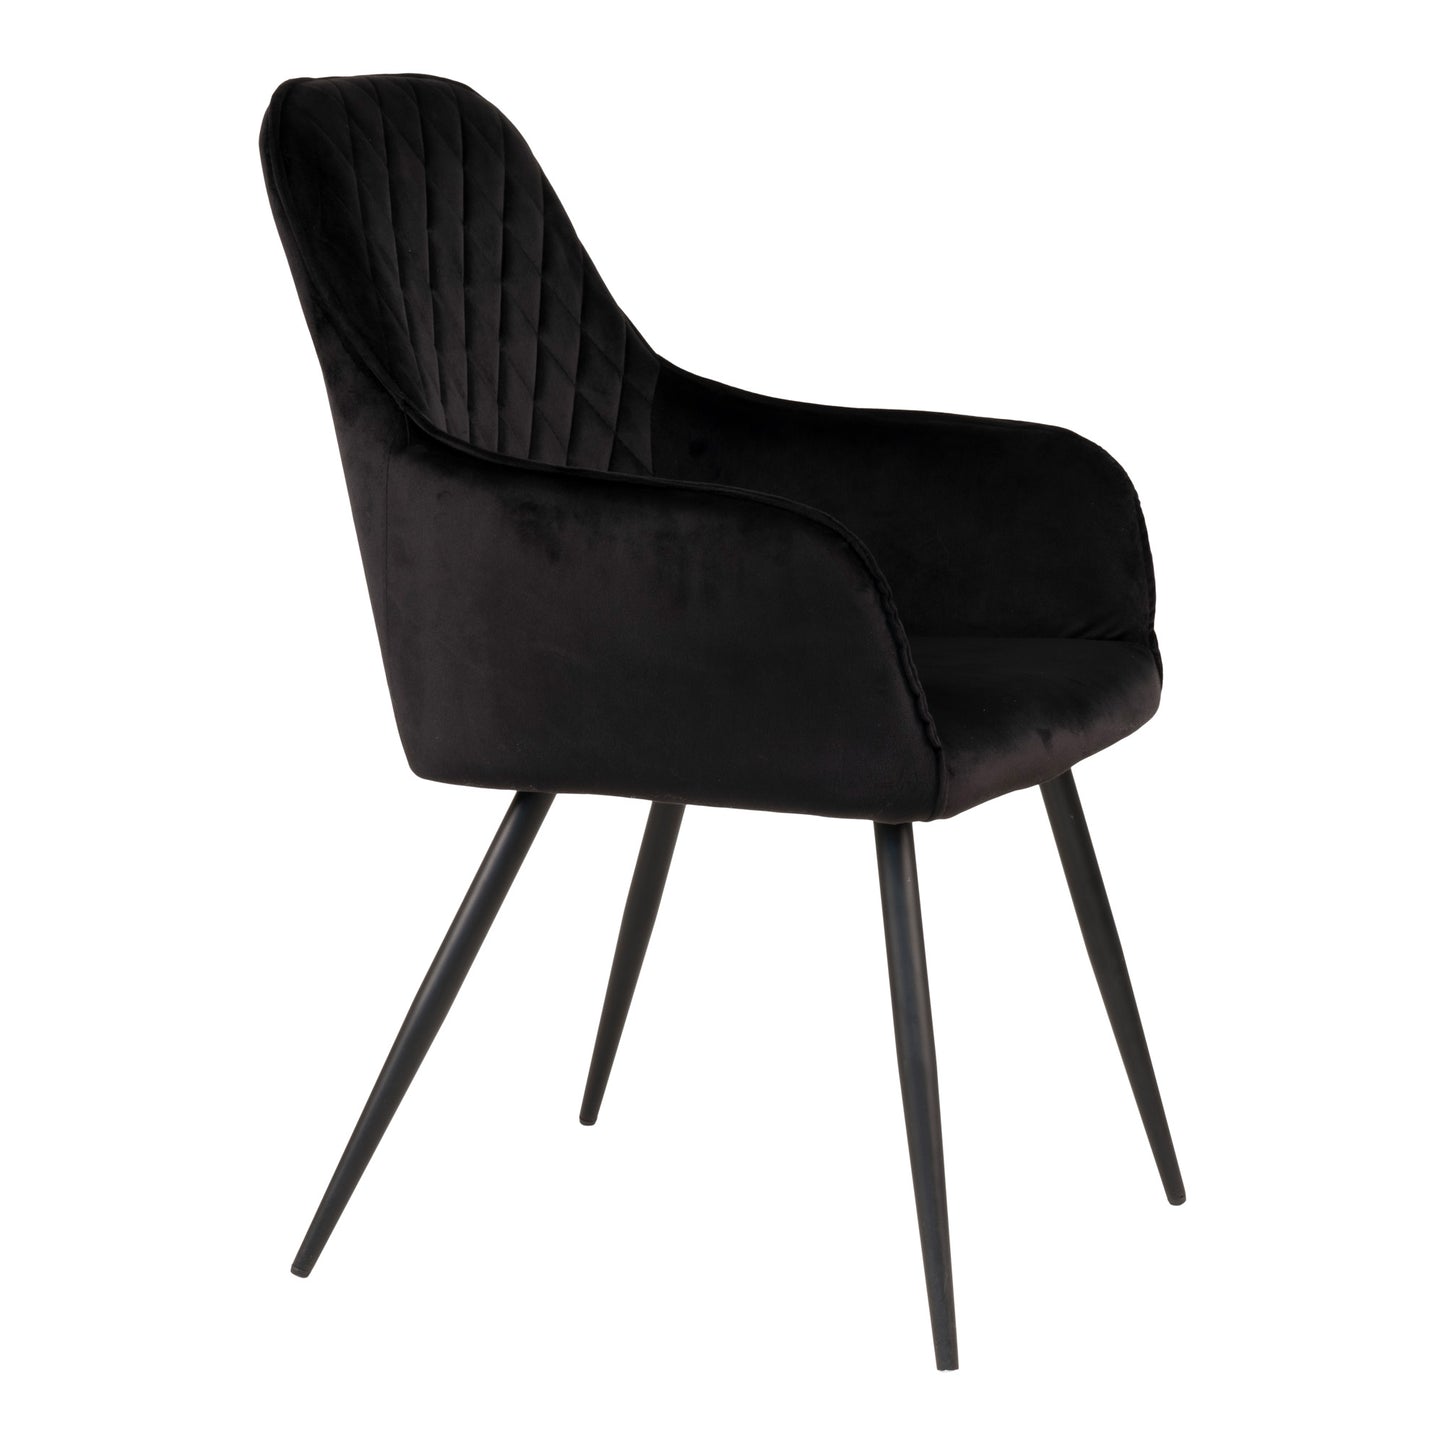 House Nordic - Harbo Dining table chair, Chair in black velour